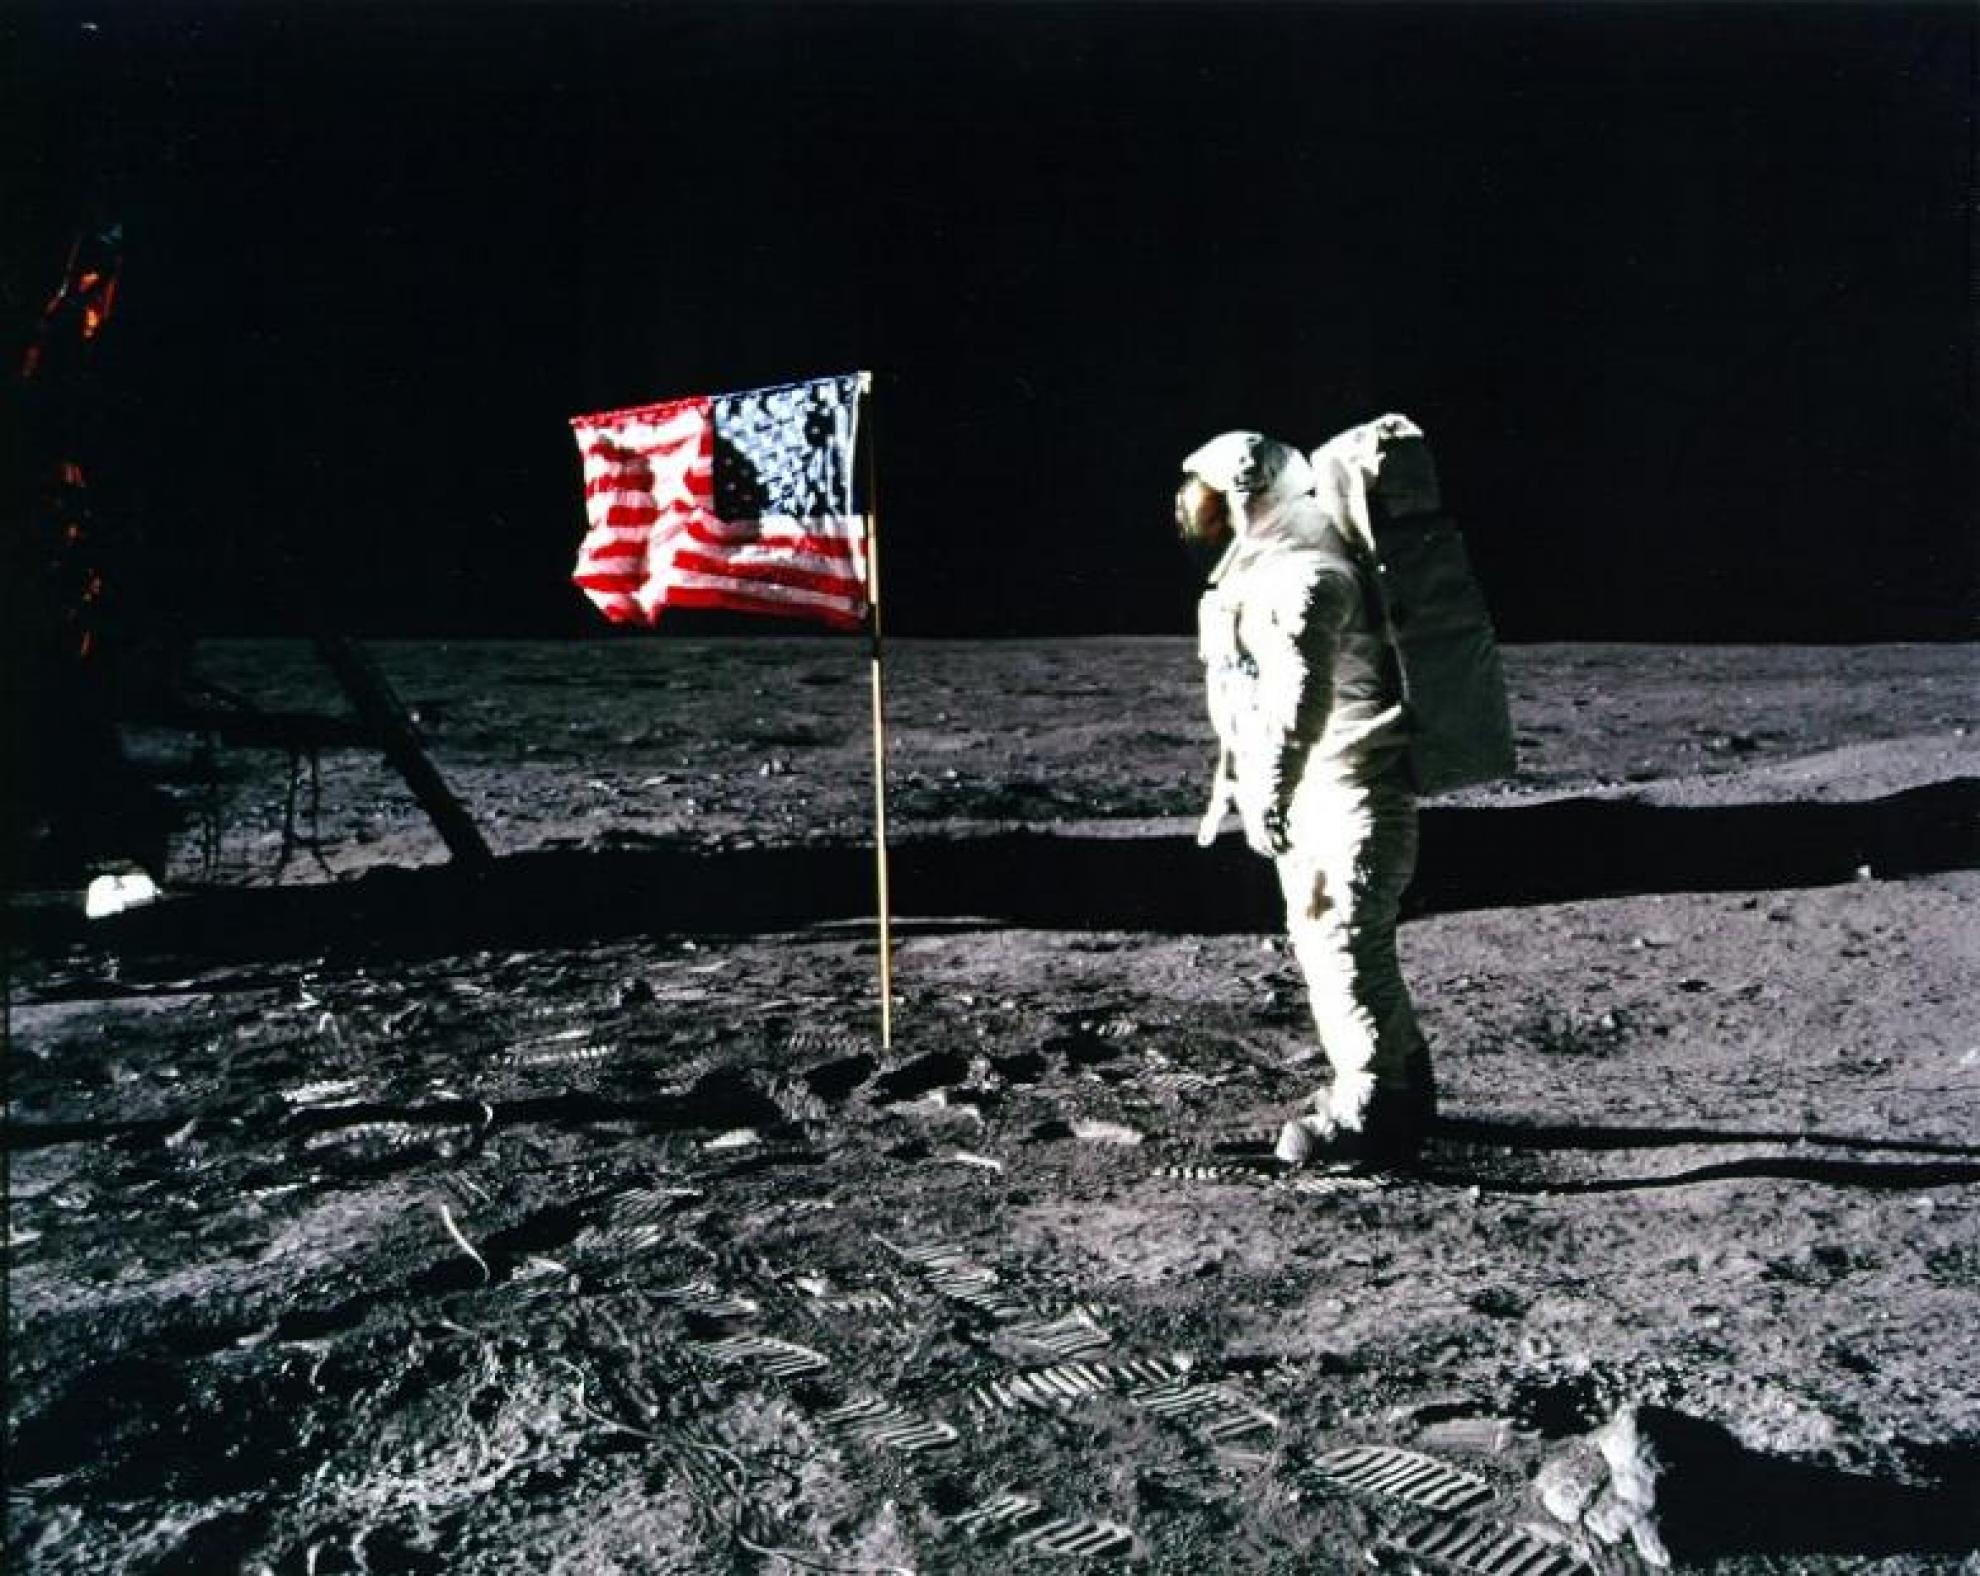 Astronaut walks on the moon with a USA flag in the background